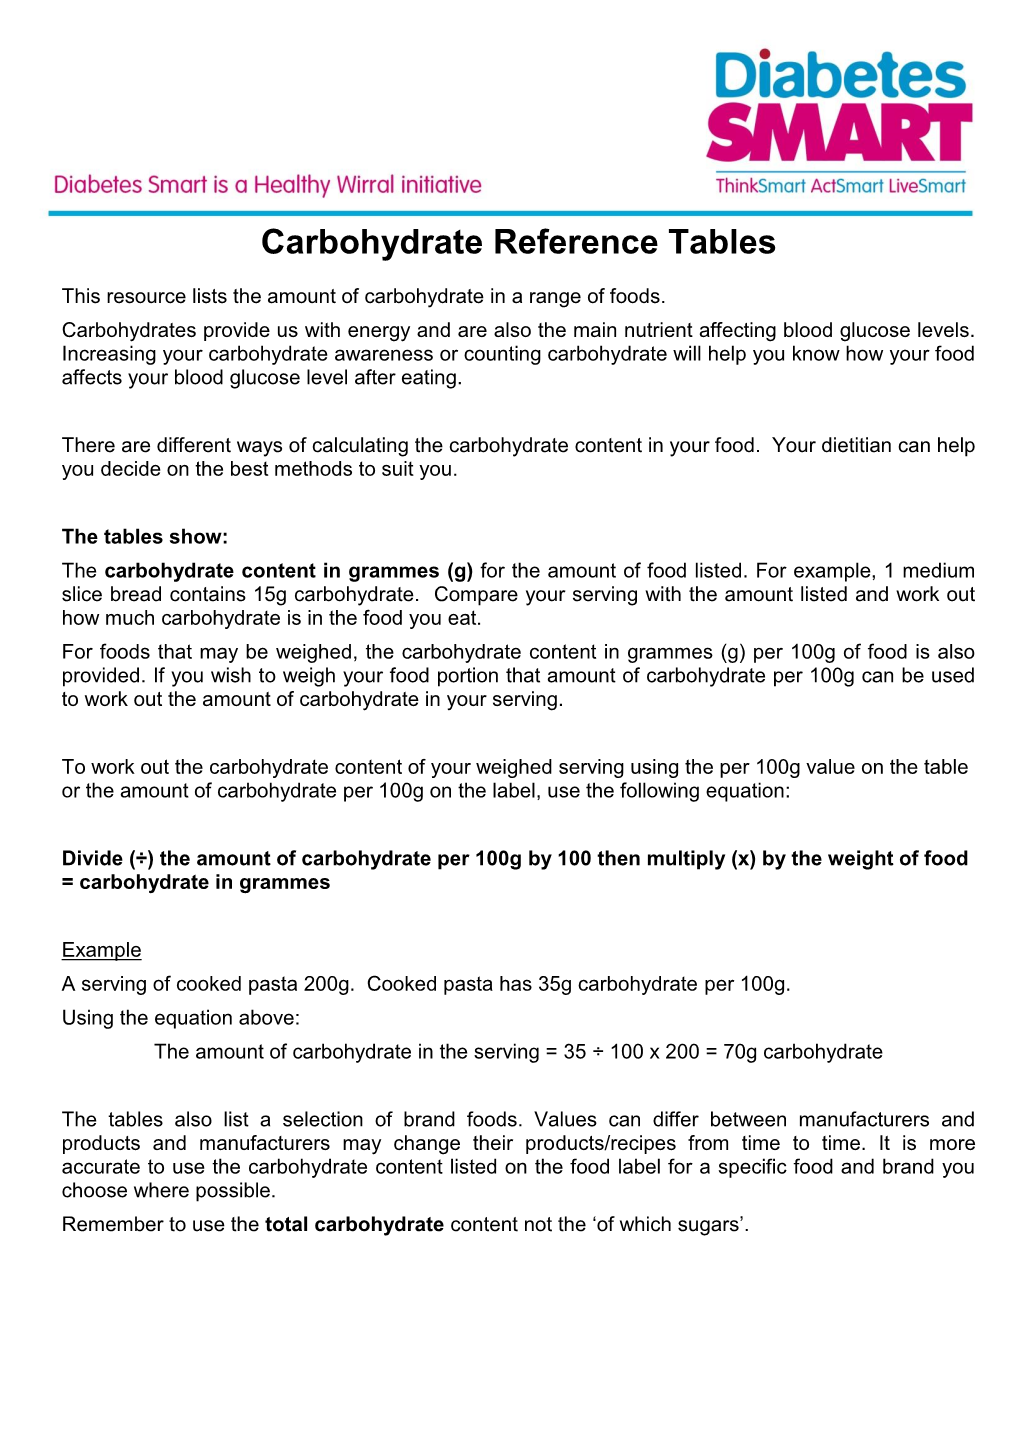 Carbohydrate Reference Tables